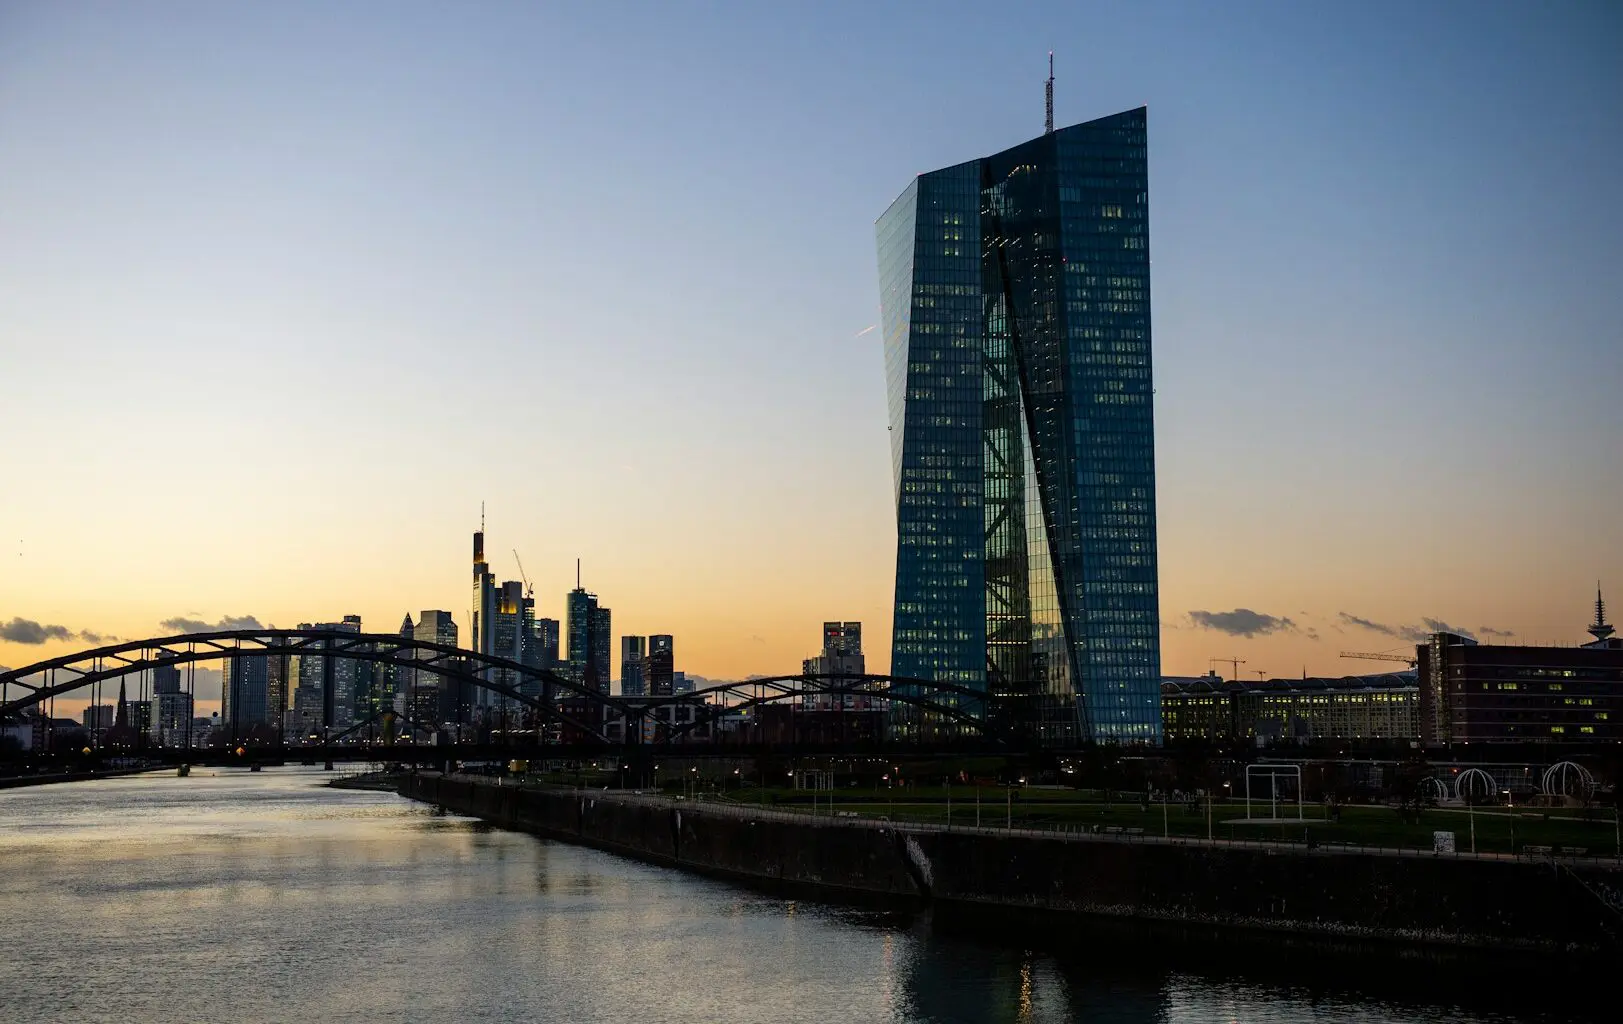 An image of the European Central Bank building.